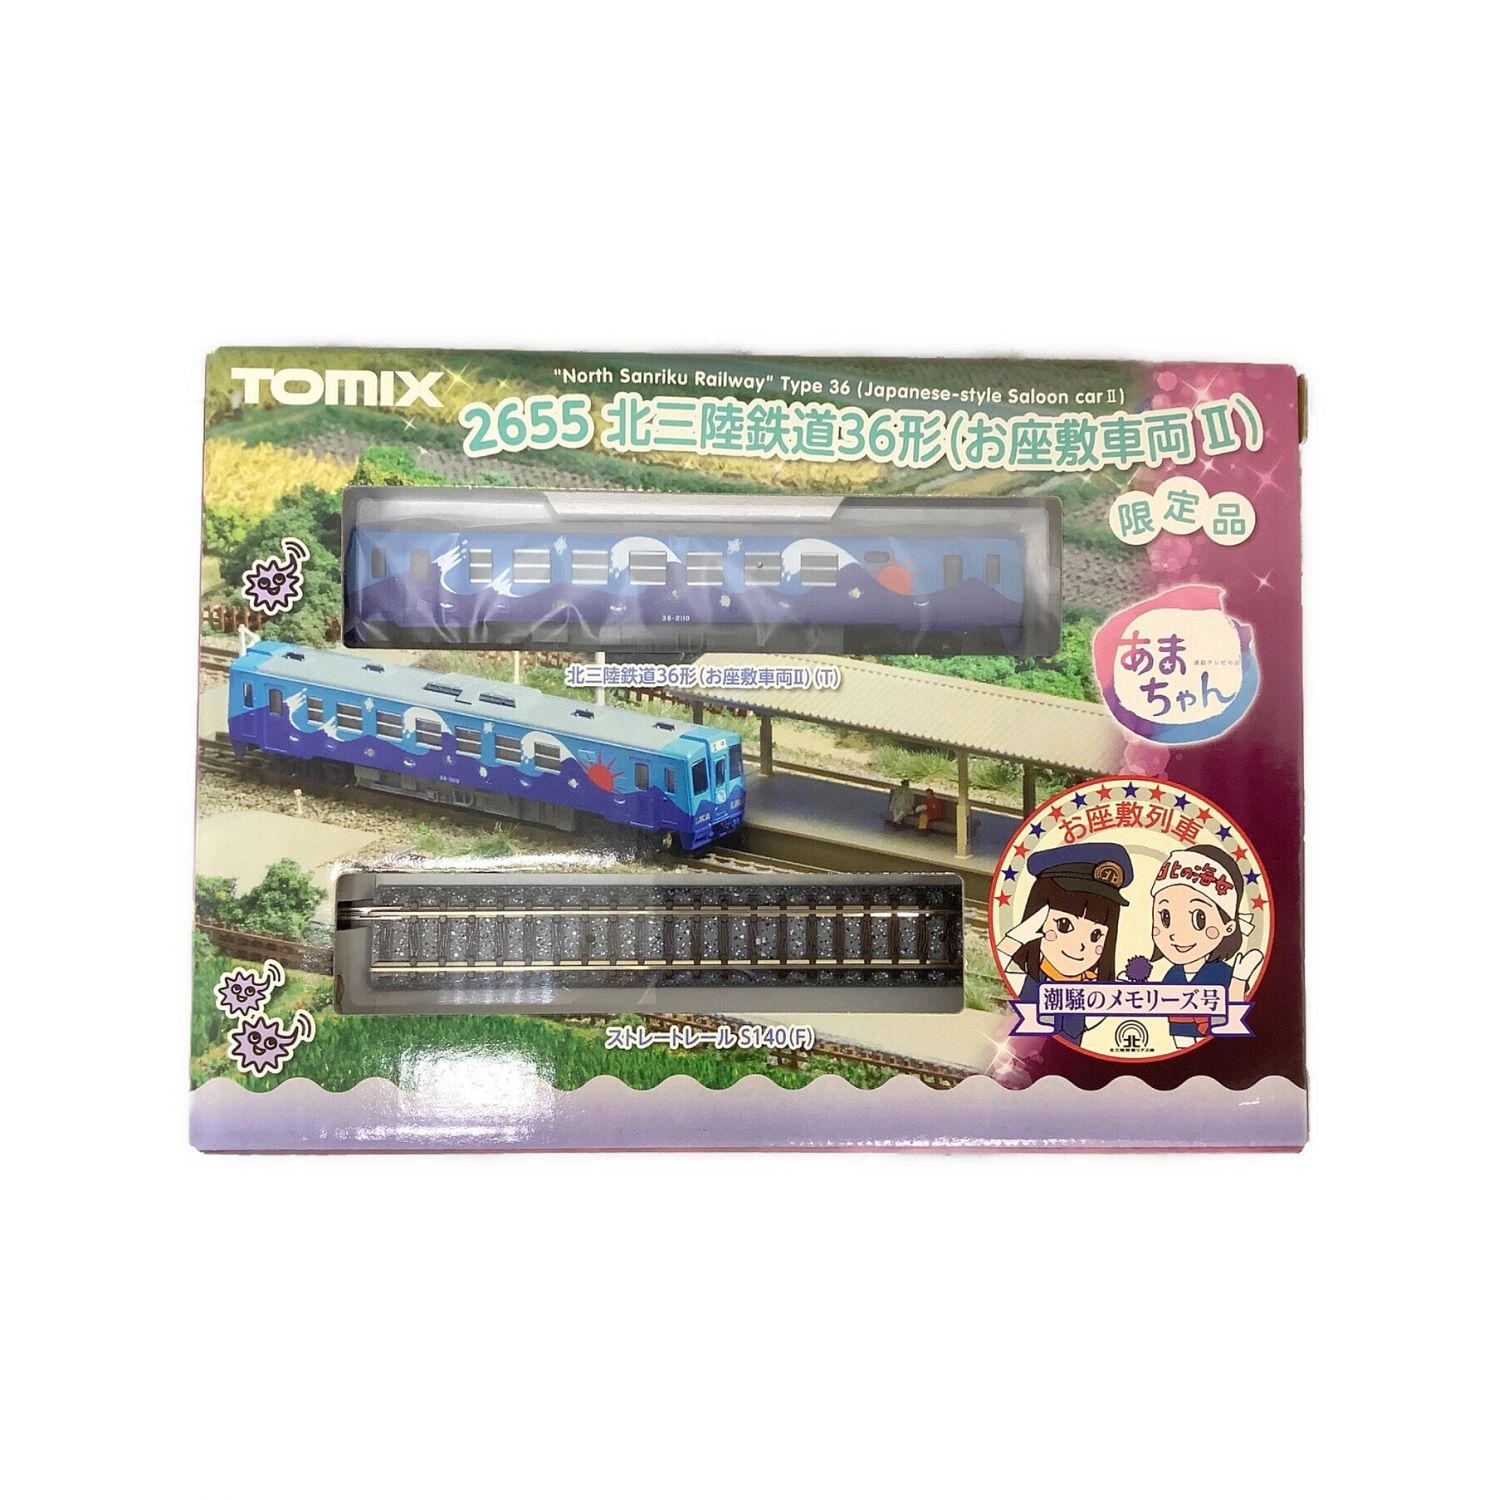 TOMIX (トミックス) Nゲージ 北三陸鉄道36形(お座敷車両Ⅱ) あまちゃん 車両セット 限定品｜トレファクONLINE